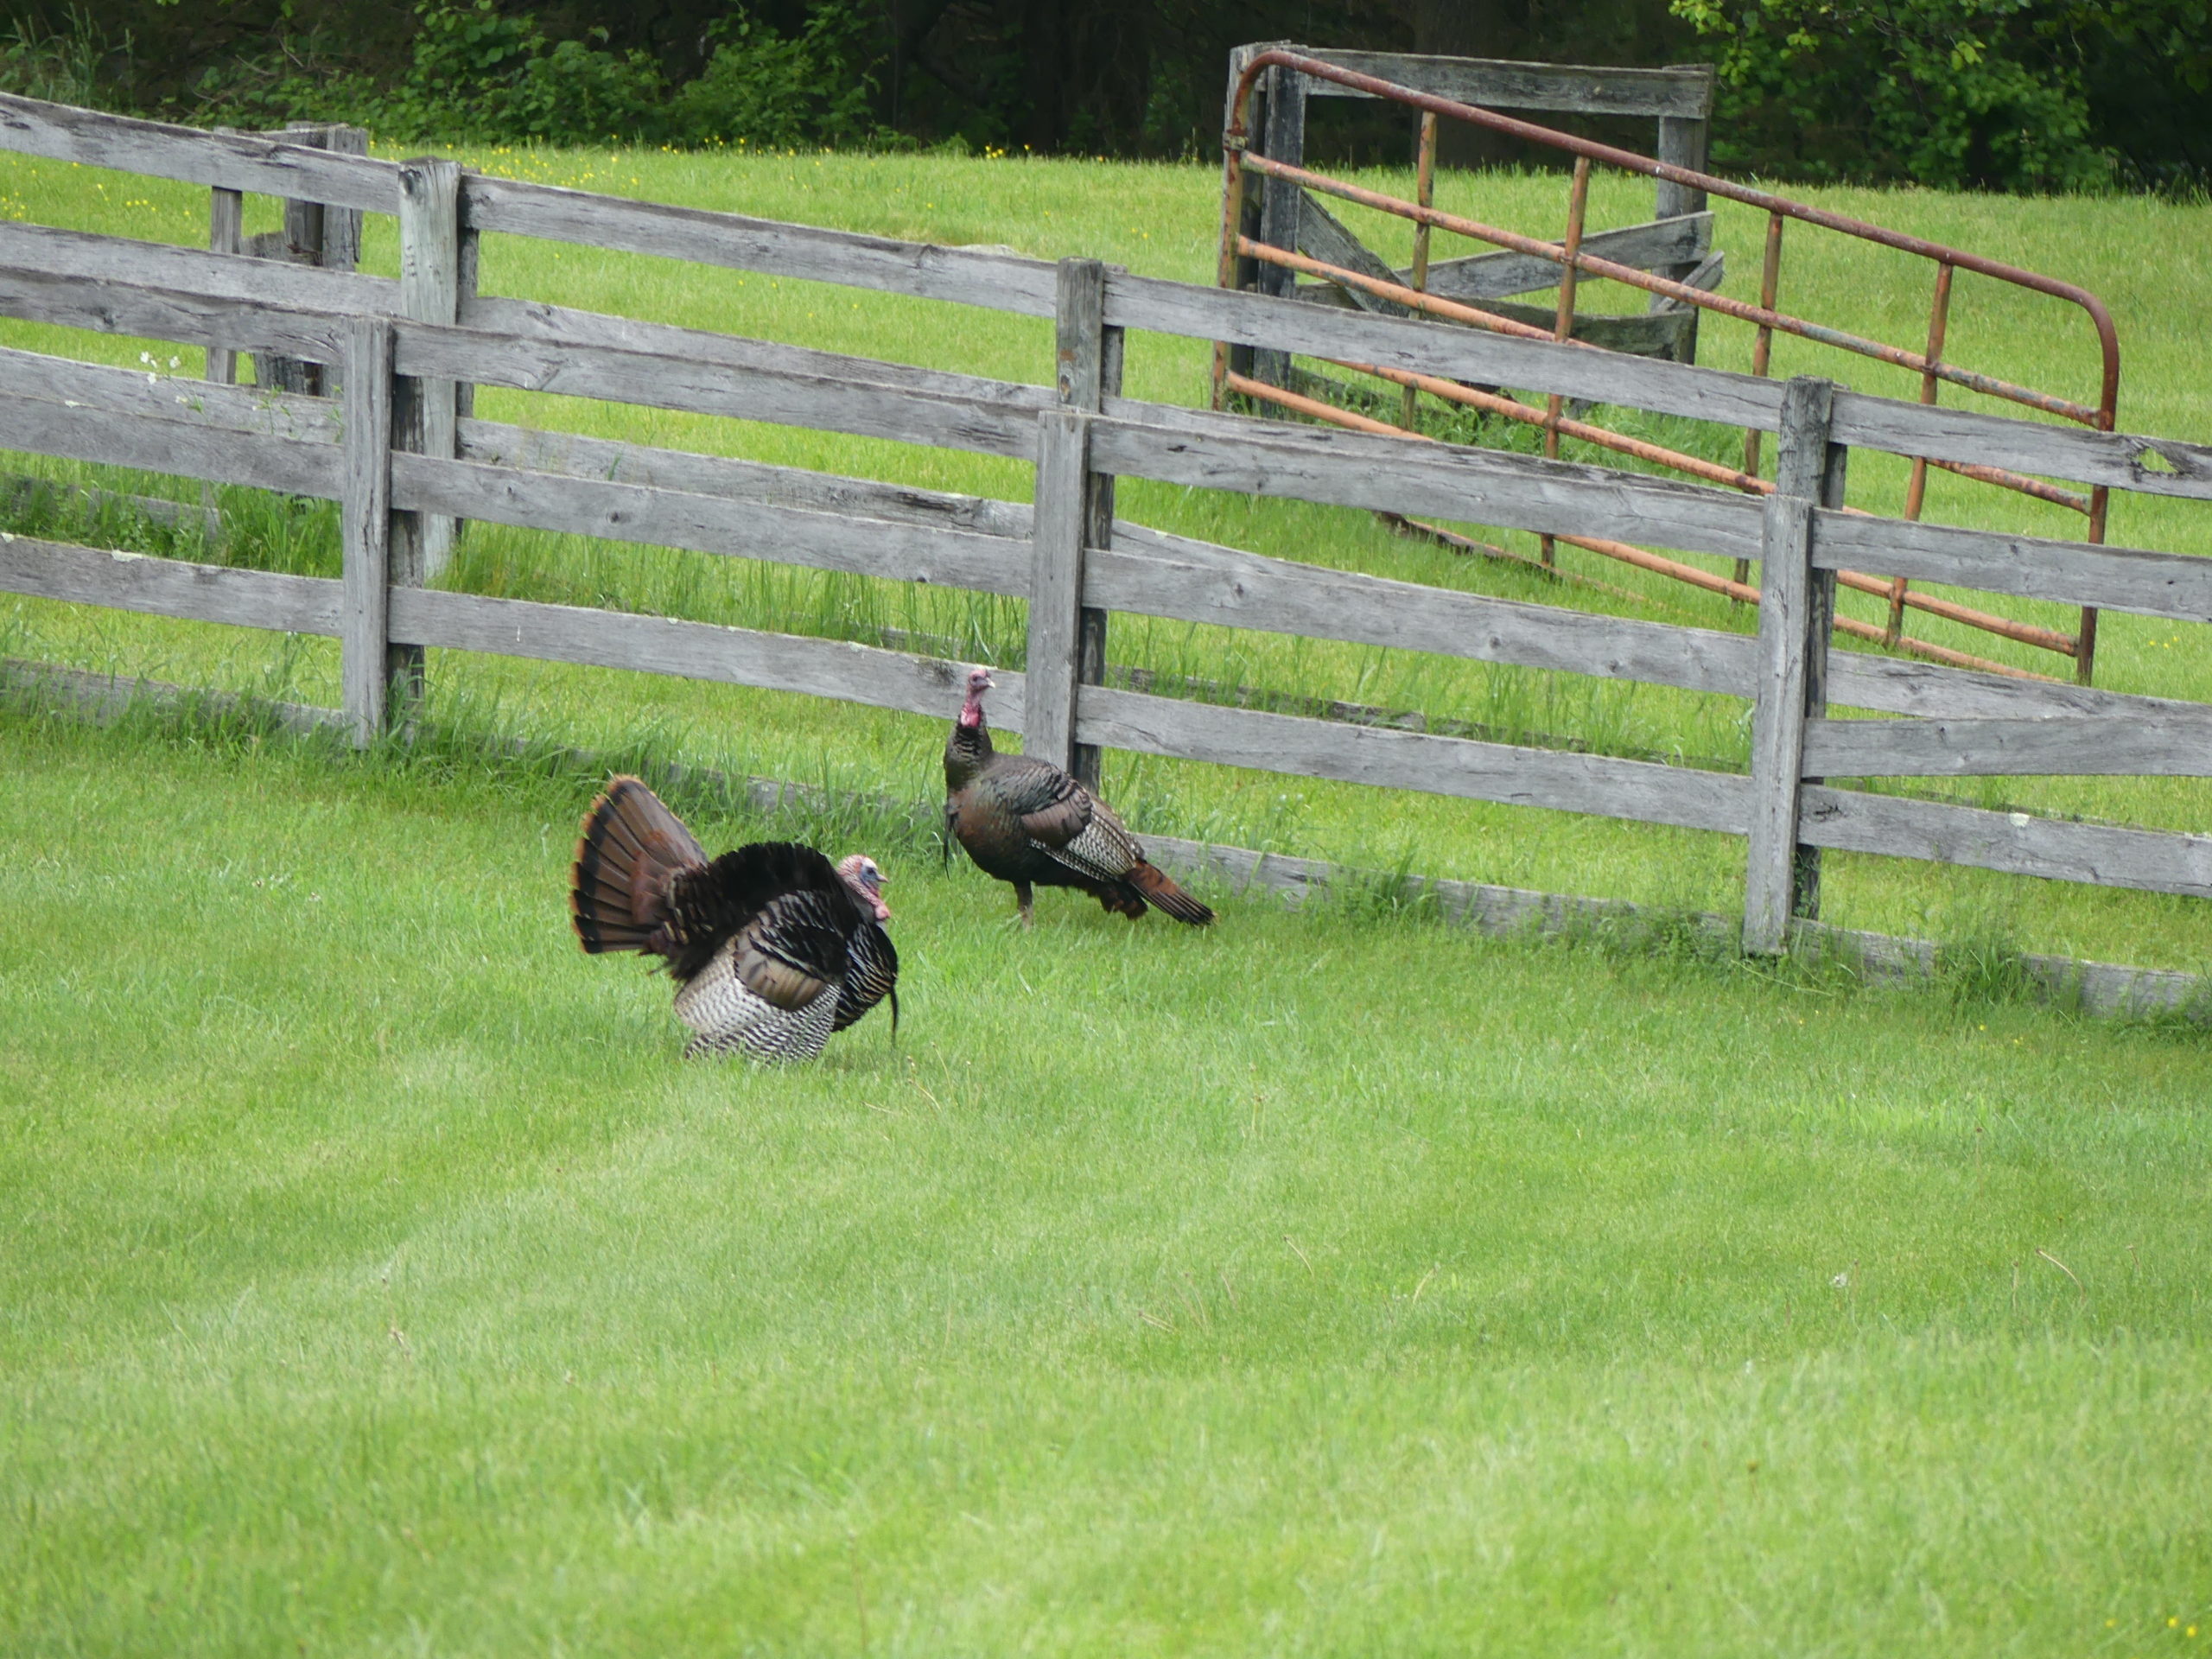 Tom and Teresa turkey strut their stuff while he woos her. Turkeys eat a variety of insects, grains and seeds but may also spread invasive plant seeds that aren’t digested.